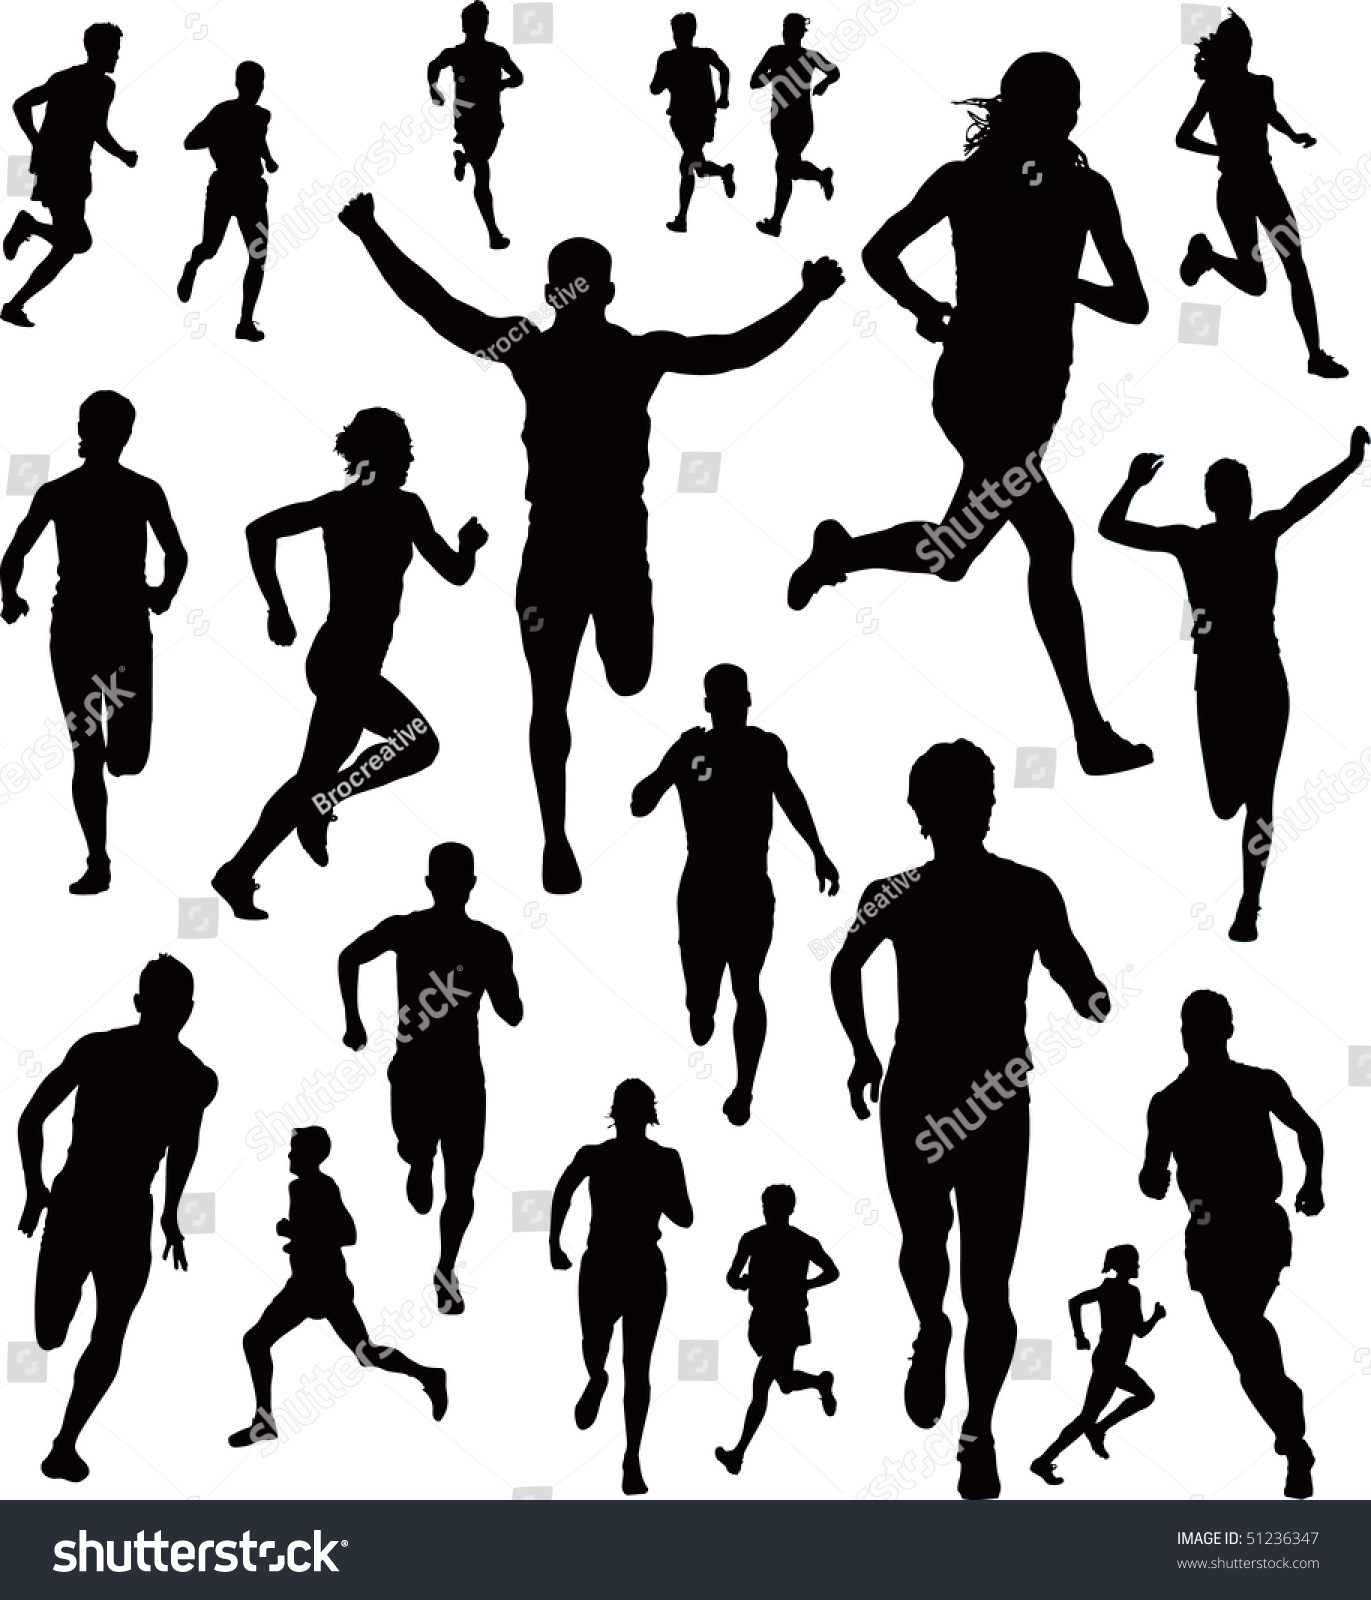 free vector clipart runners - photo #24